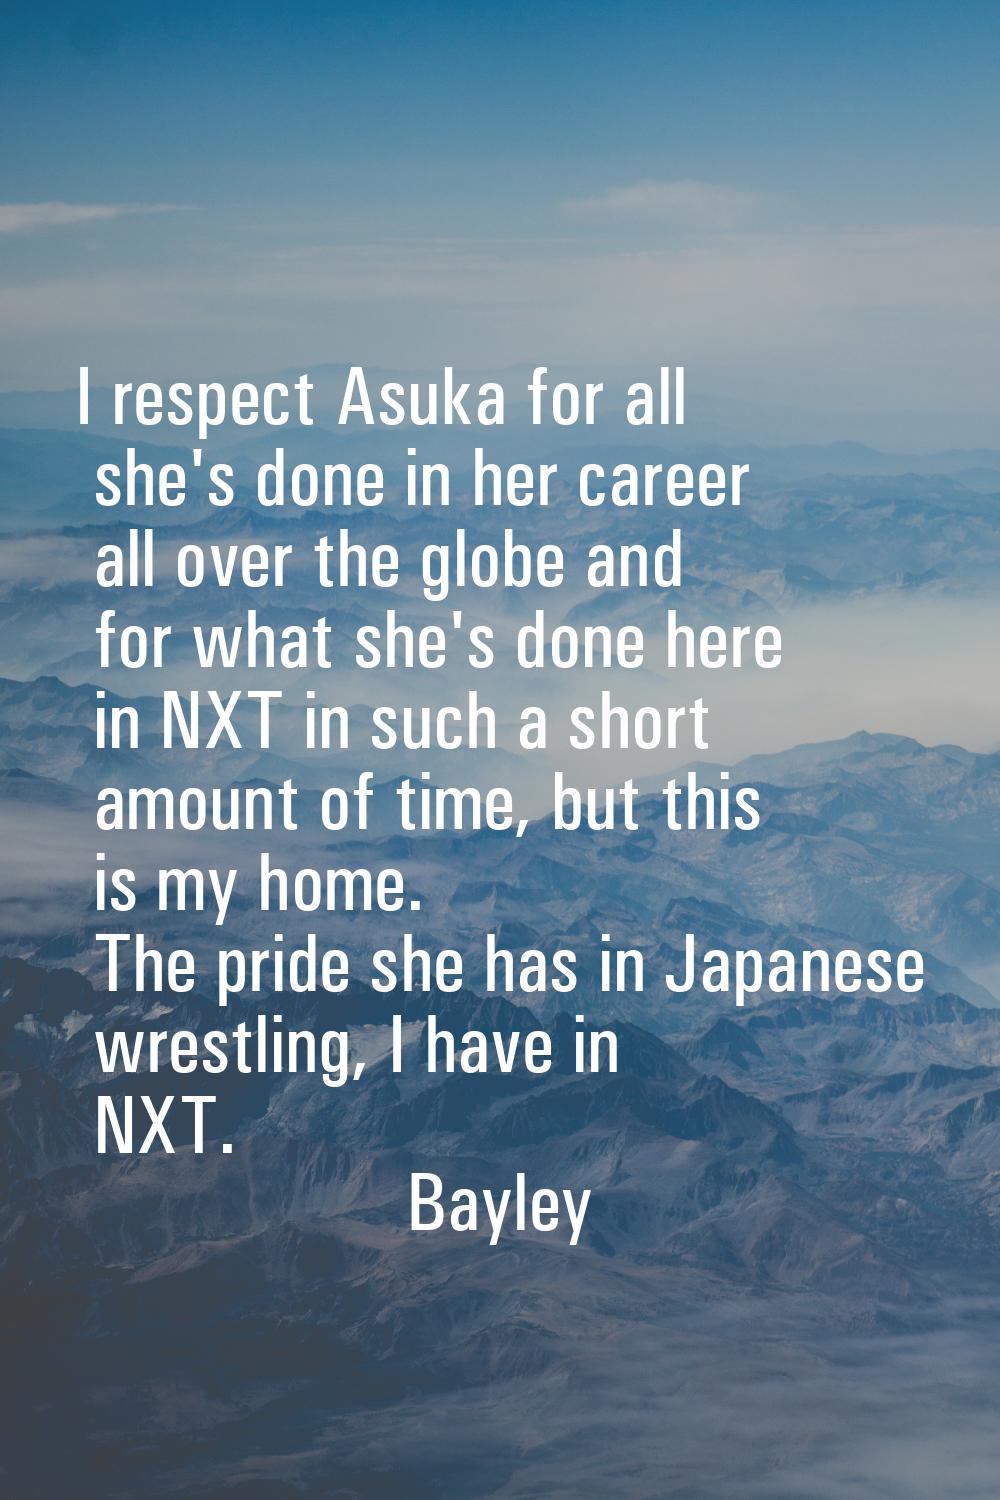 I respect Asuka for all she's done in her career all over the globe and for what she's done here in